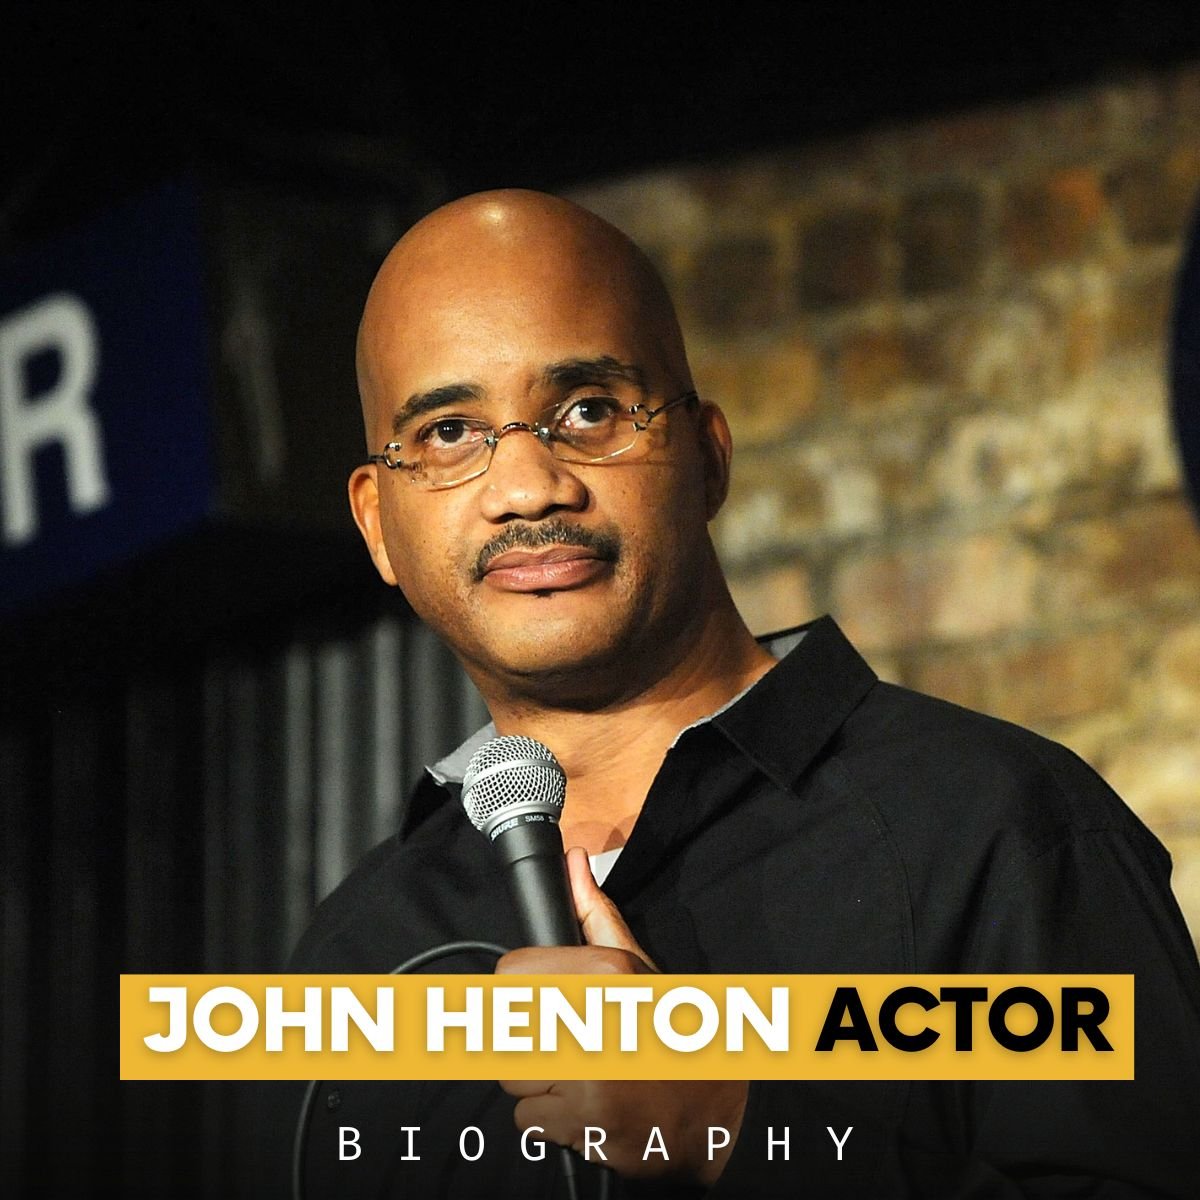 Who Is John Henton Actor? – Everything You Need To Know